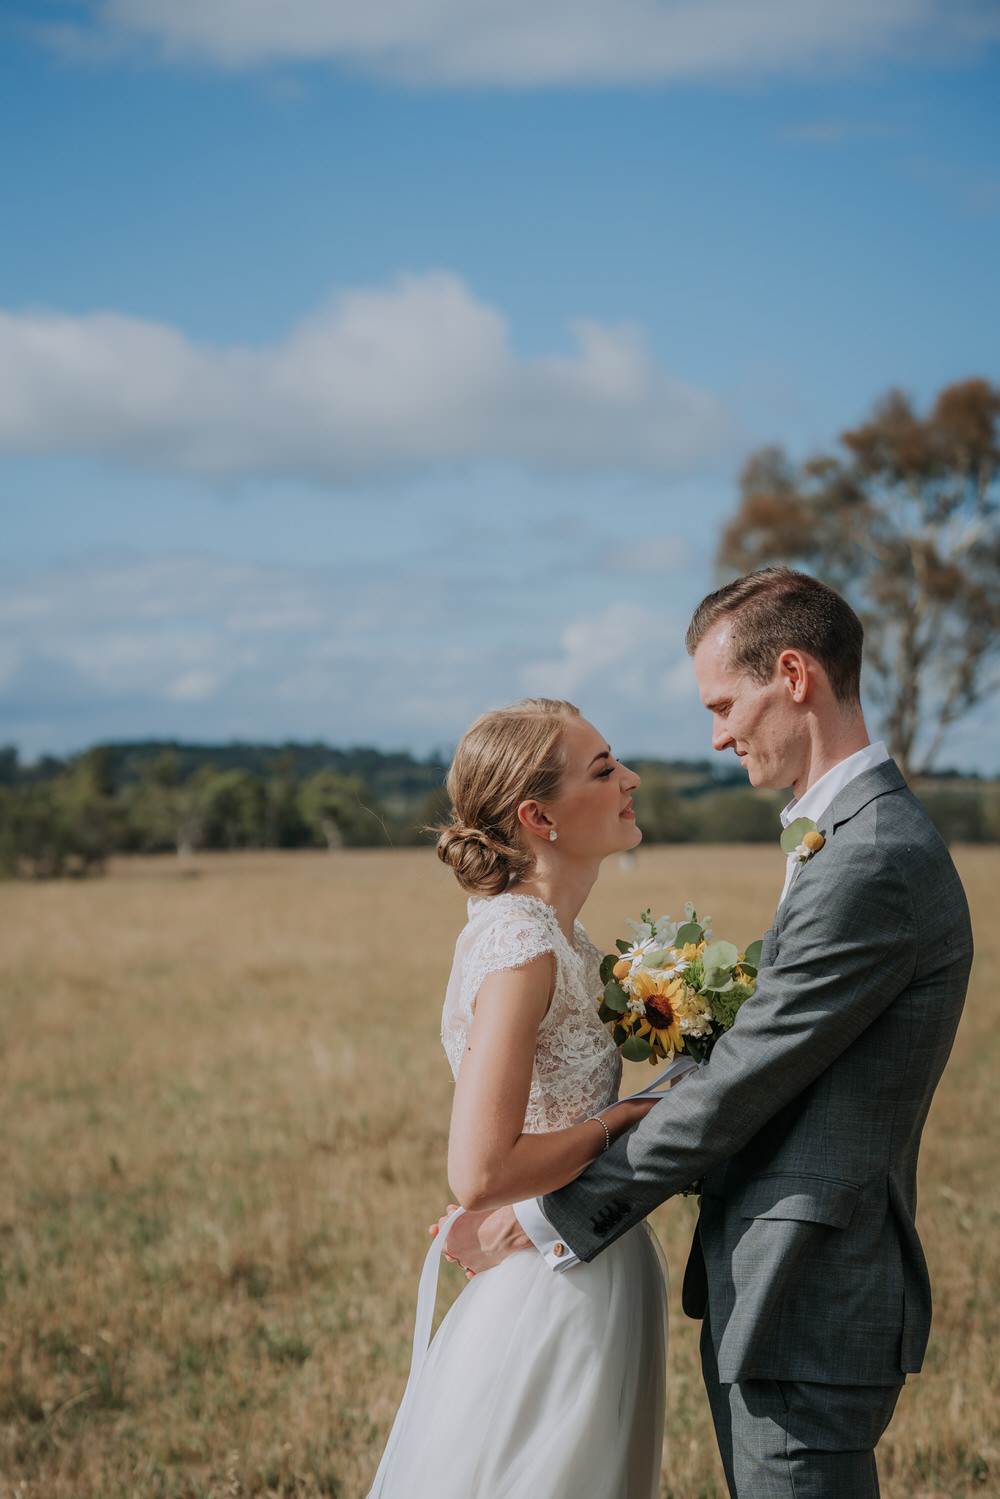 ava-me-photography-sophie-jack-drumderry-homestead-st-judes-bowral-sutton-forest-wedding-302